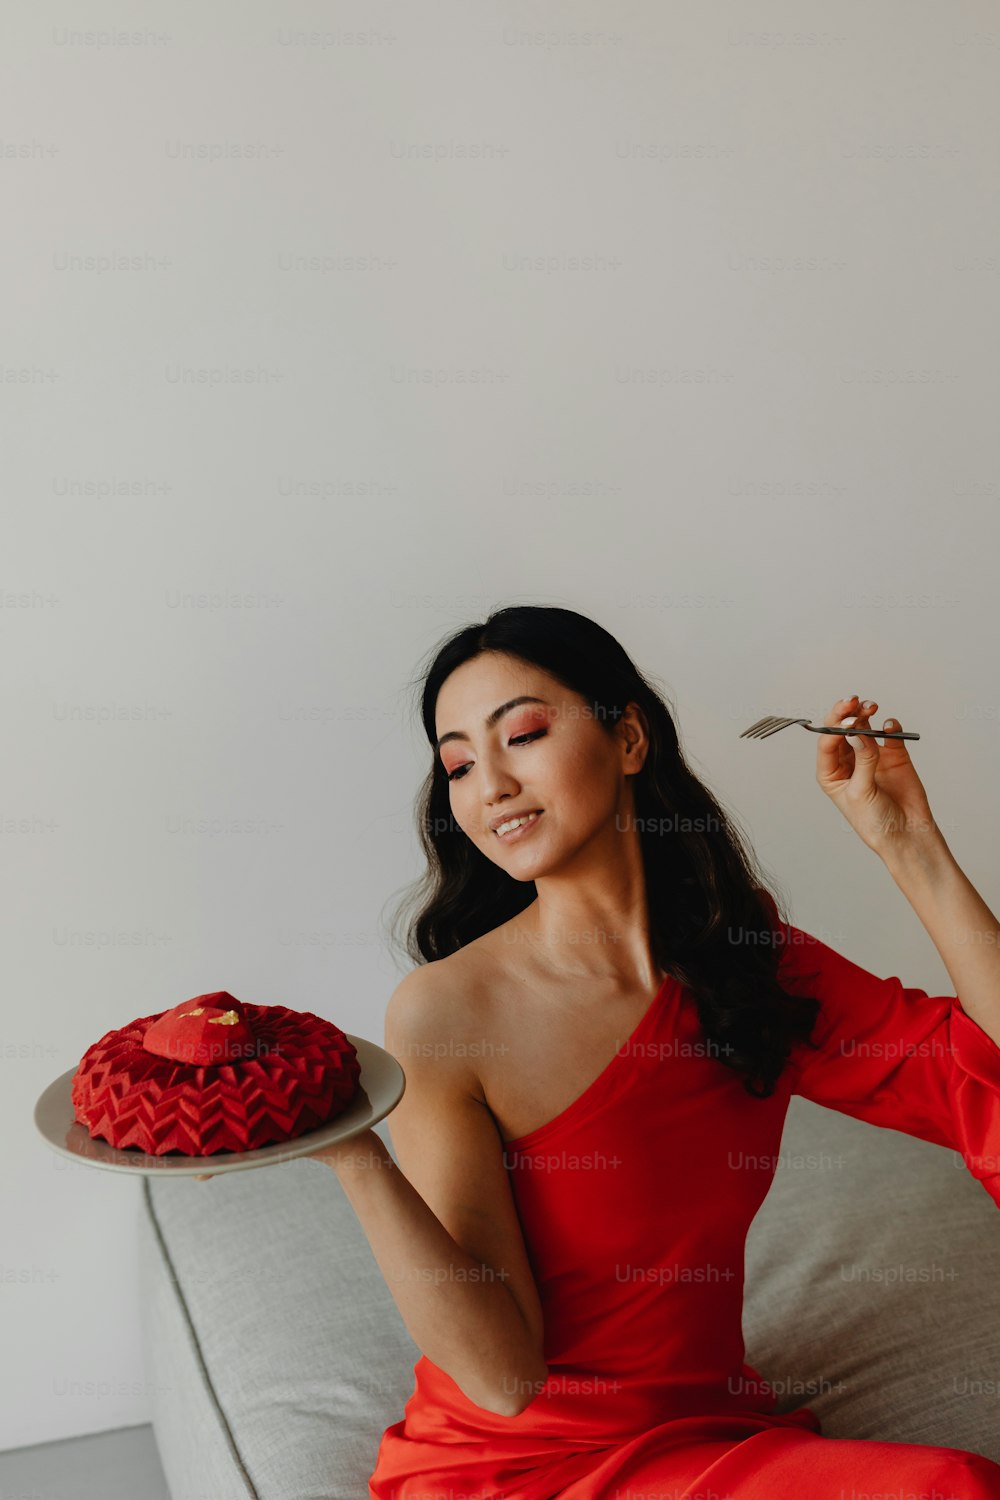 a woman in a red dress holding a plate with a cake on it